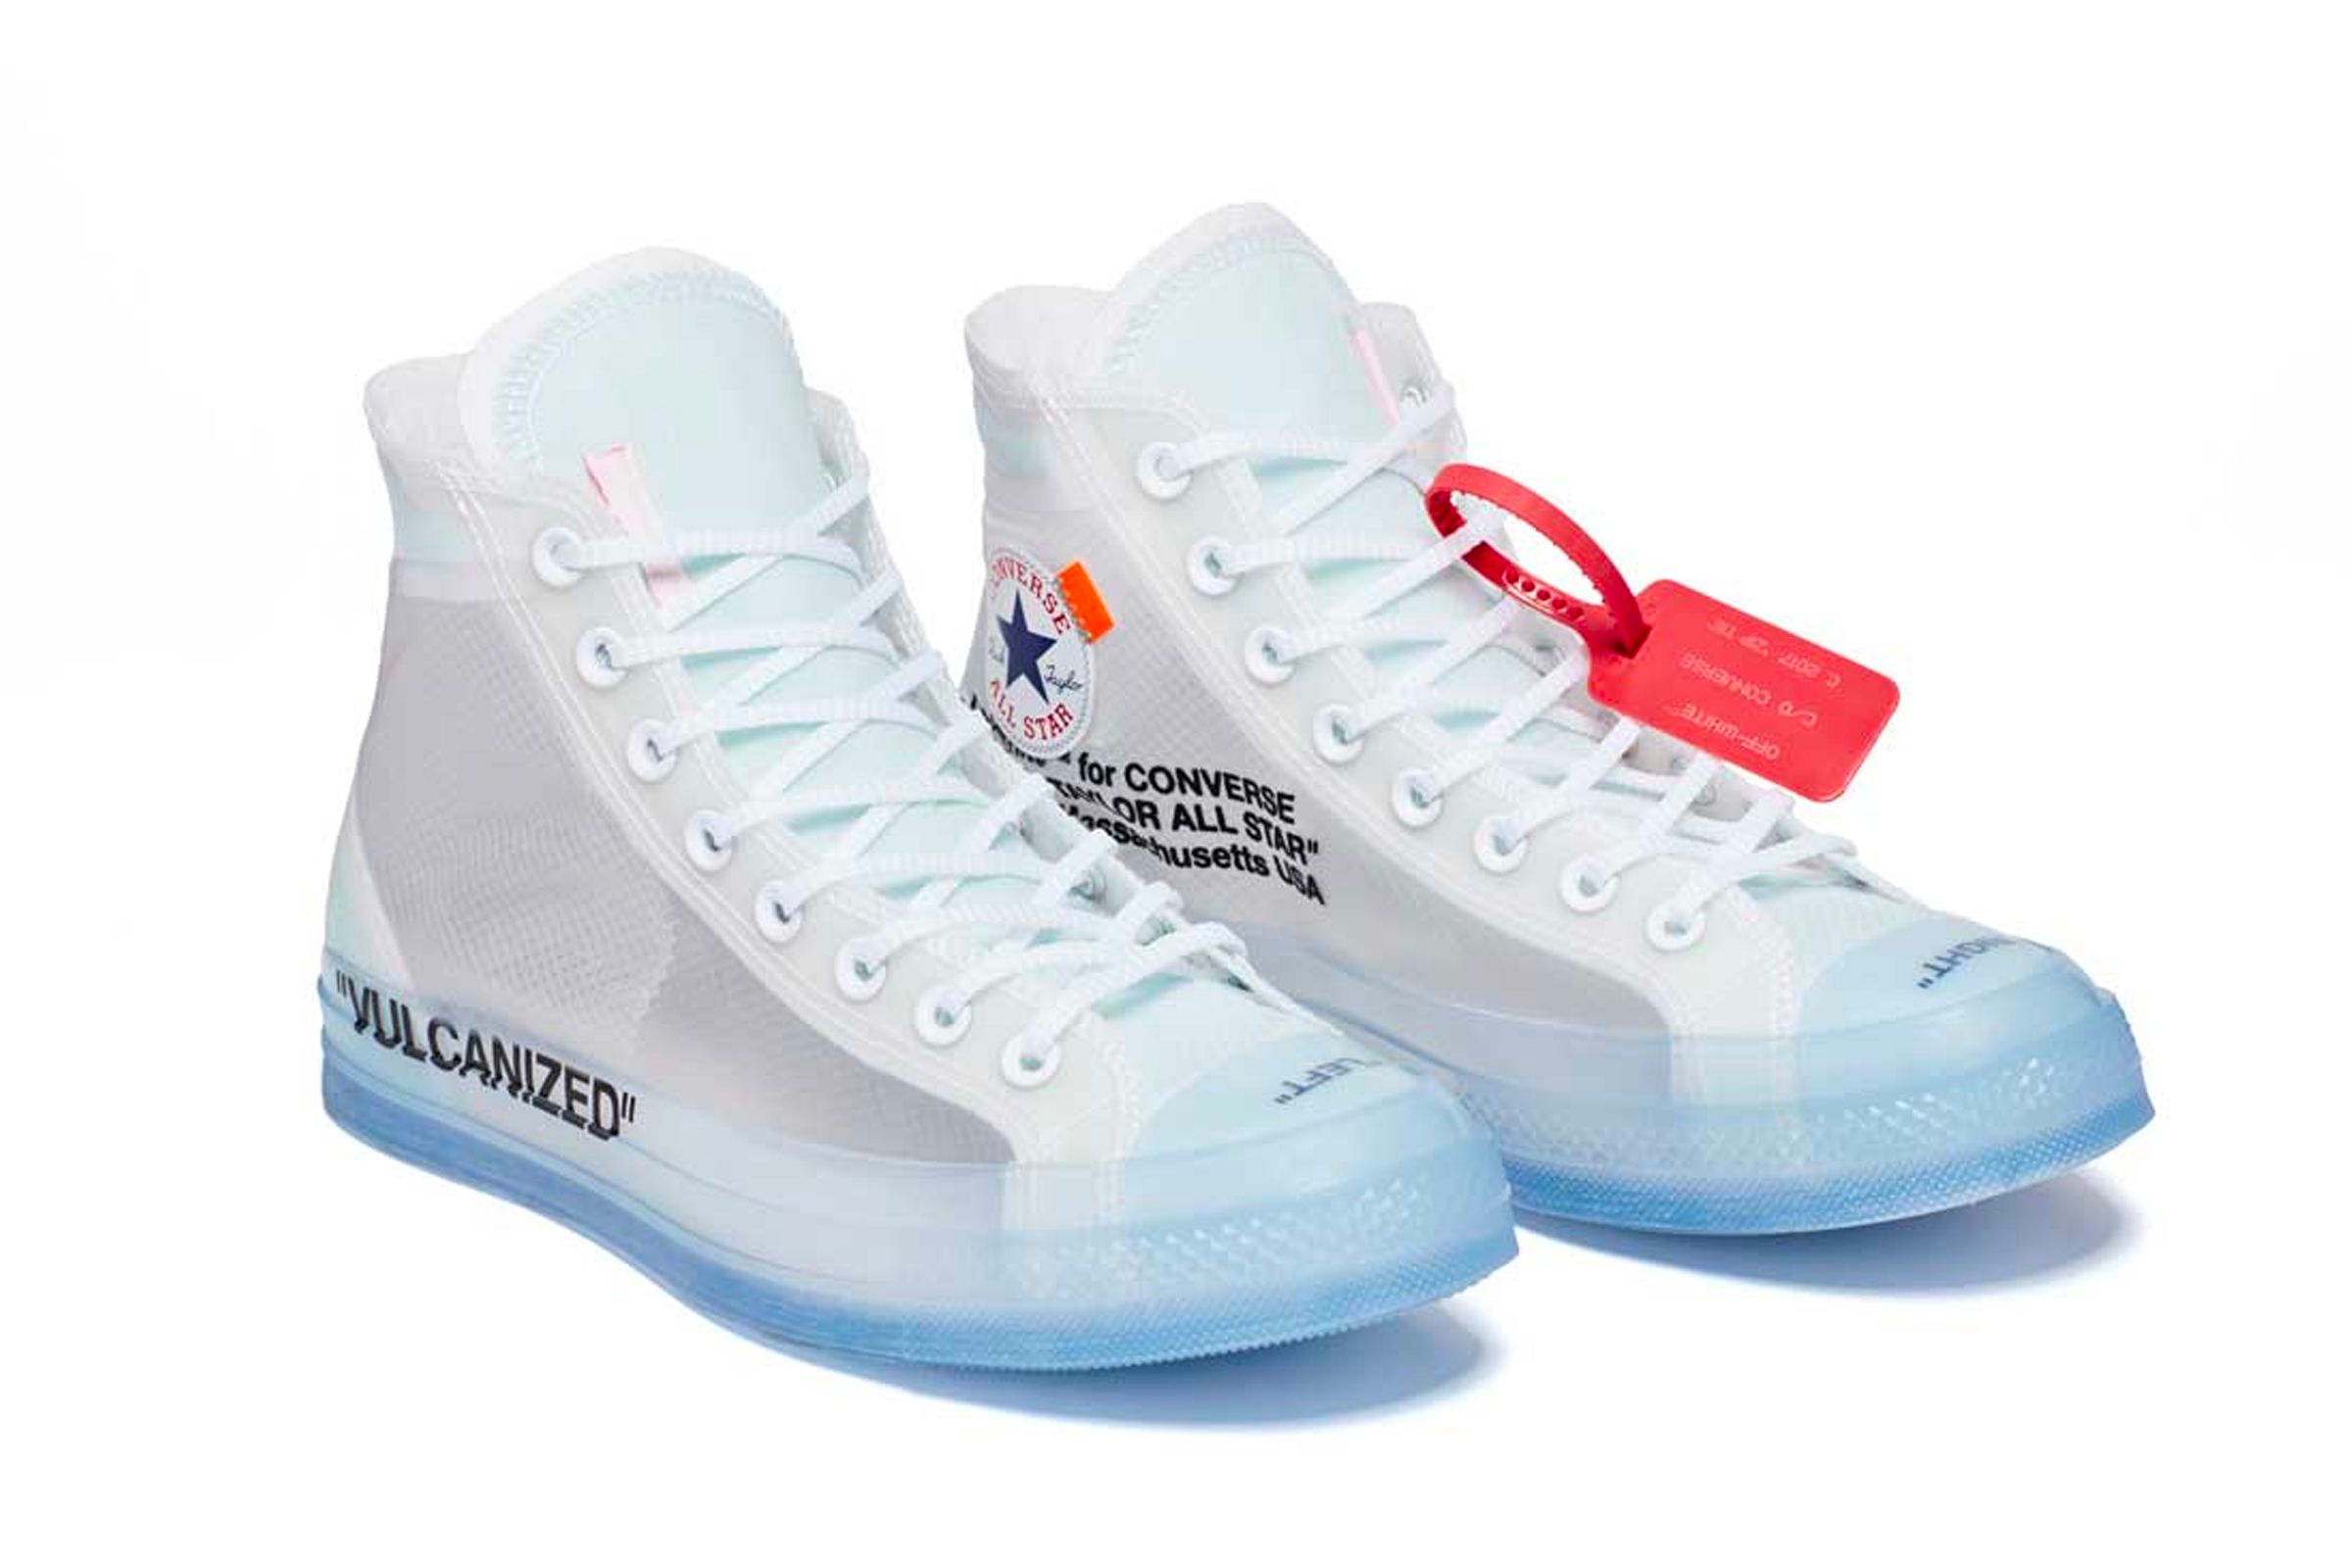 Off-White x Converse Chuck Taylor Drops This Weekend | Grailed